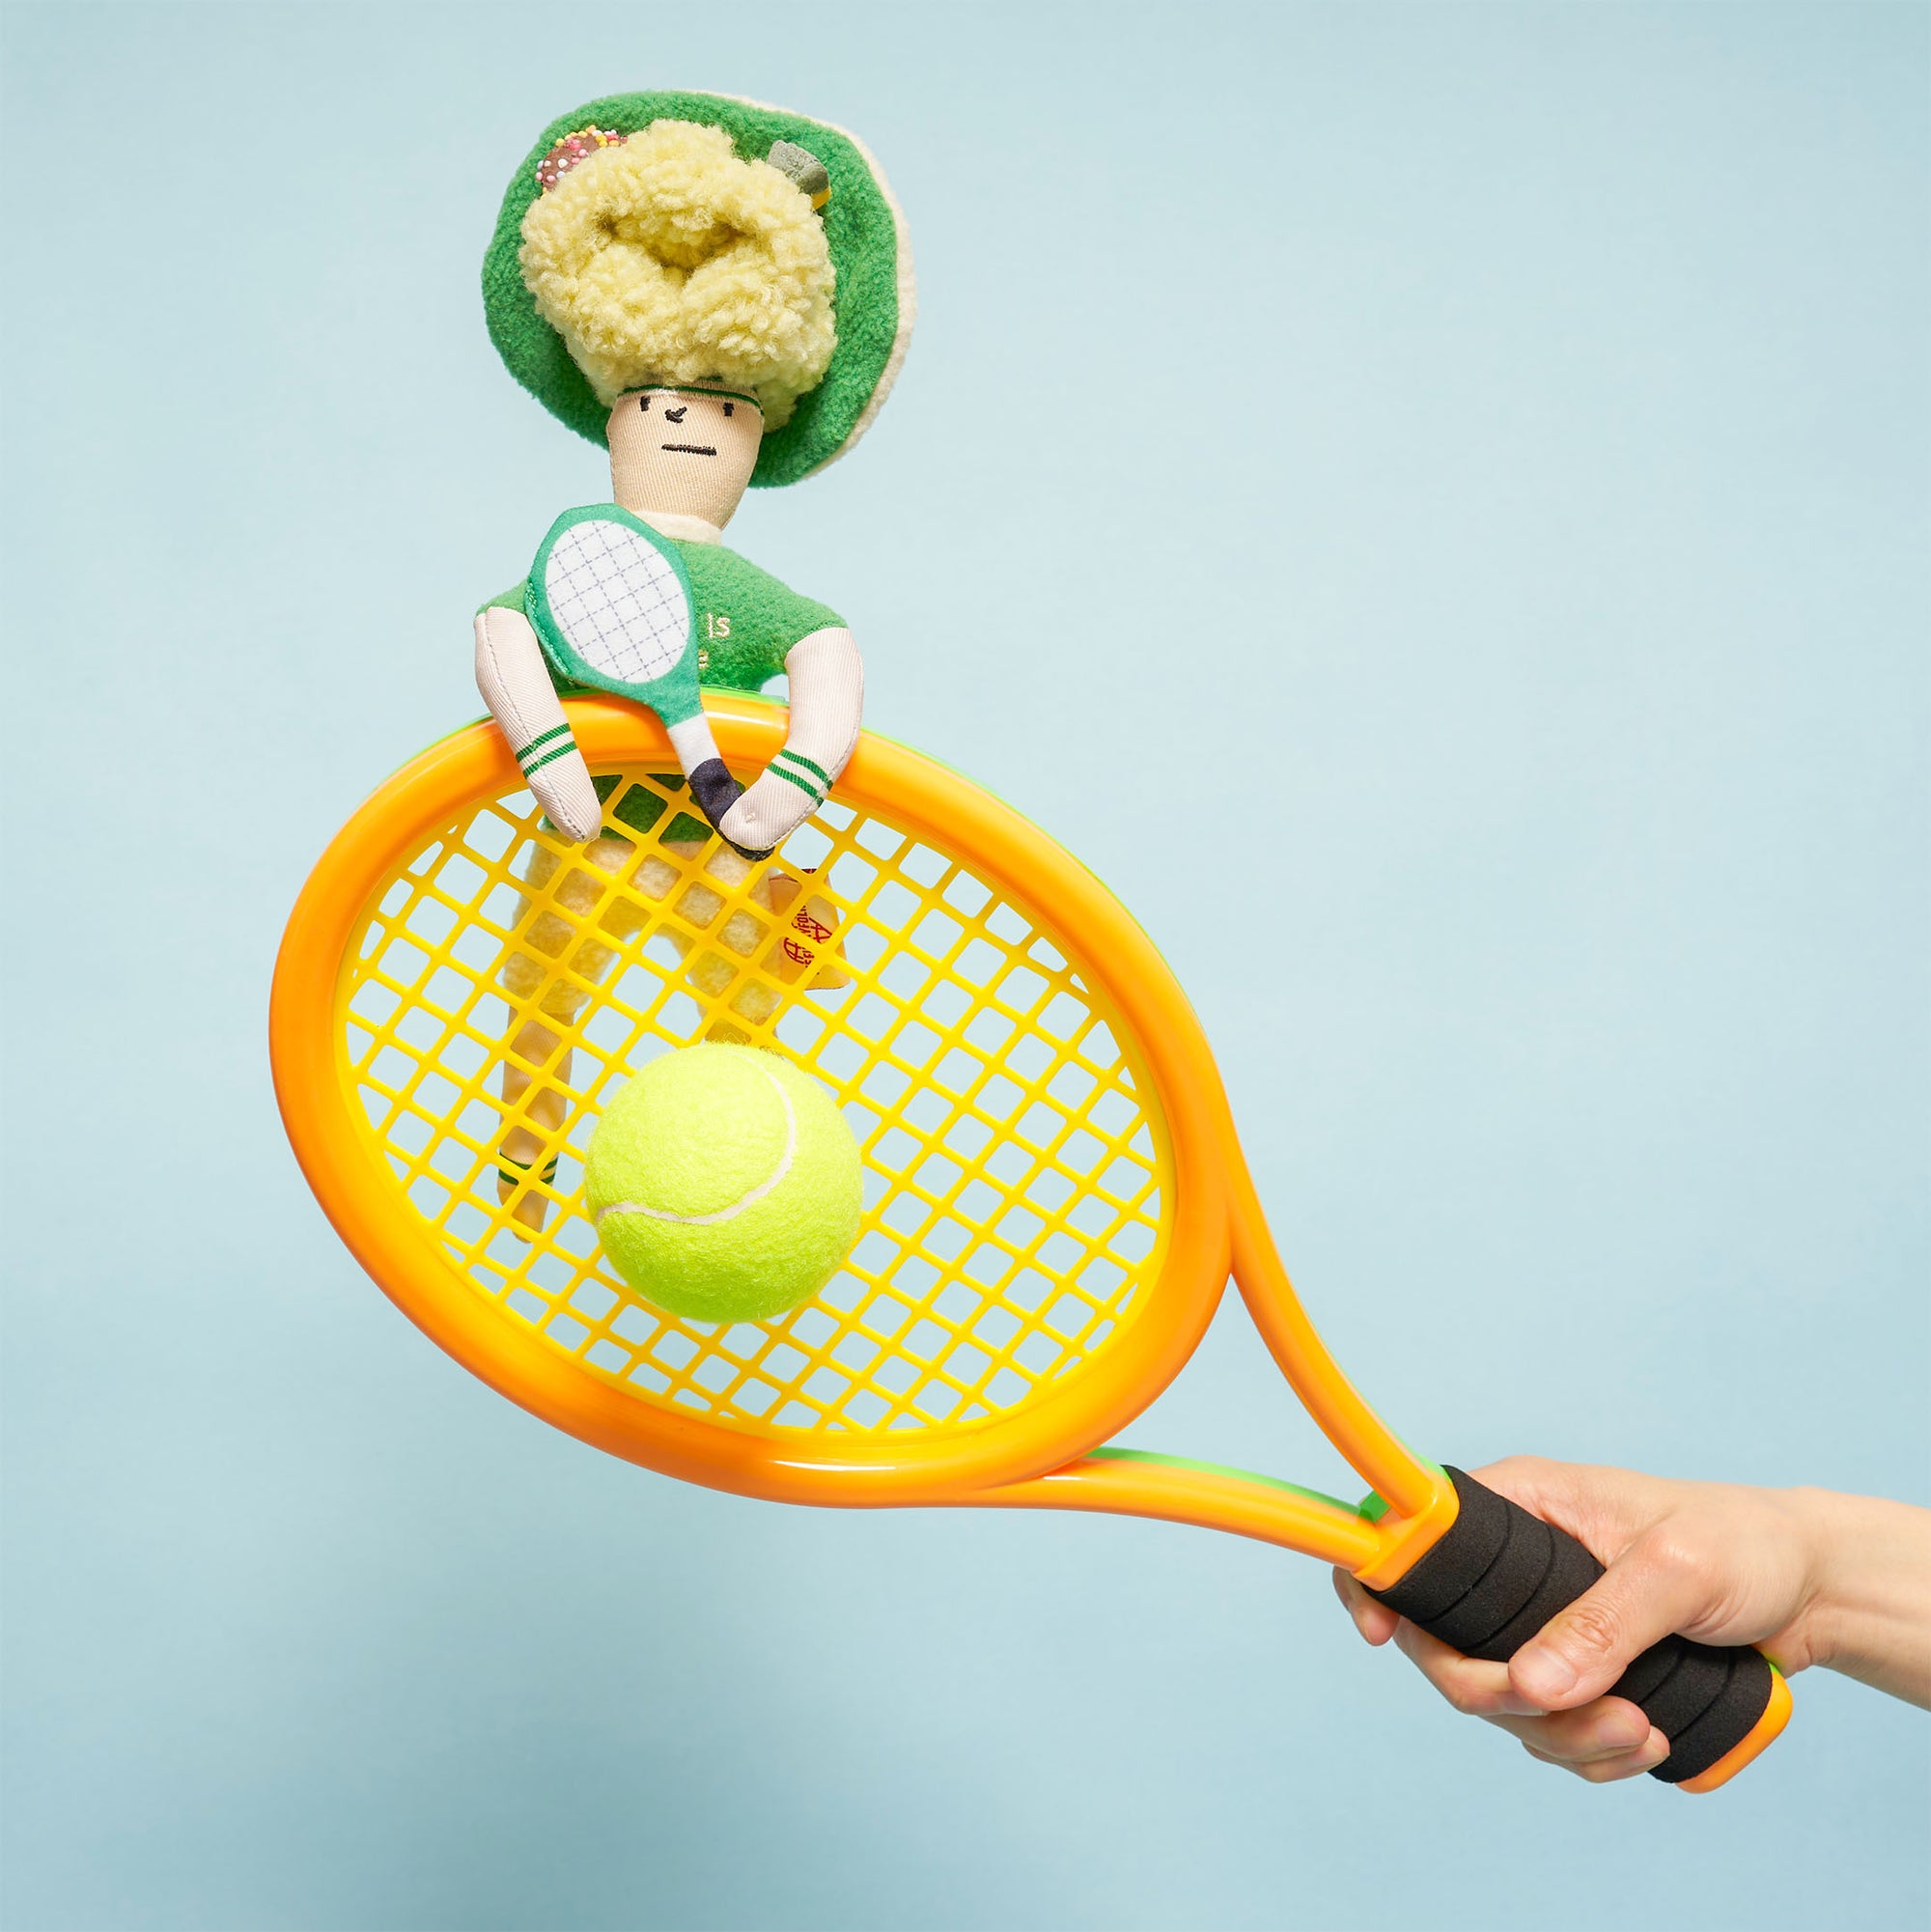 The image depicts a plush toy seated on an orange and yellow tennis racket held by a human hand. The toy is styled as a tennis player, with a green hat decorated with pink plush flowers, a green sweater with "the ball is my life" written on it, and a small white tennis racket. The background is a light blue, providing a clean and bright aesthetic.